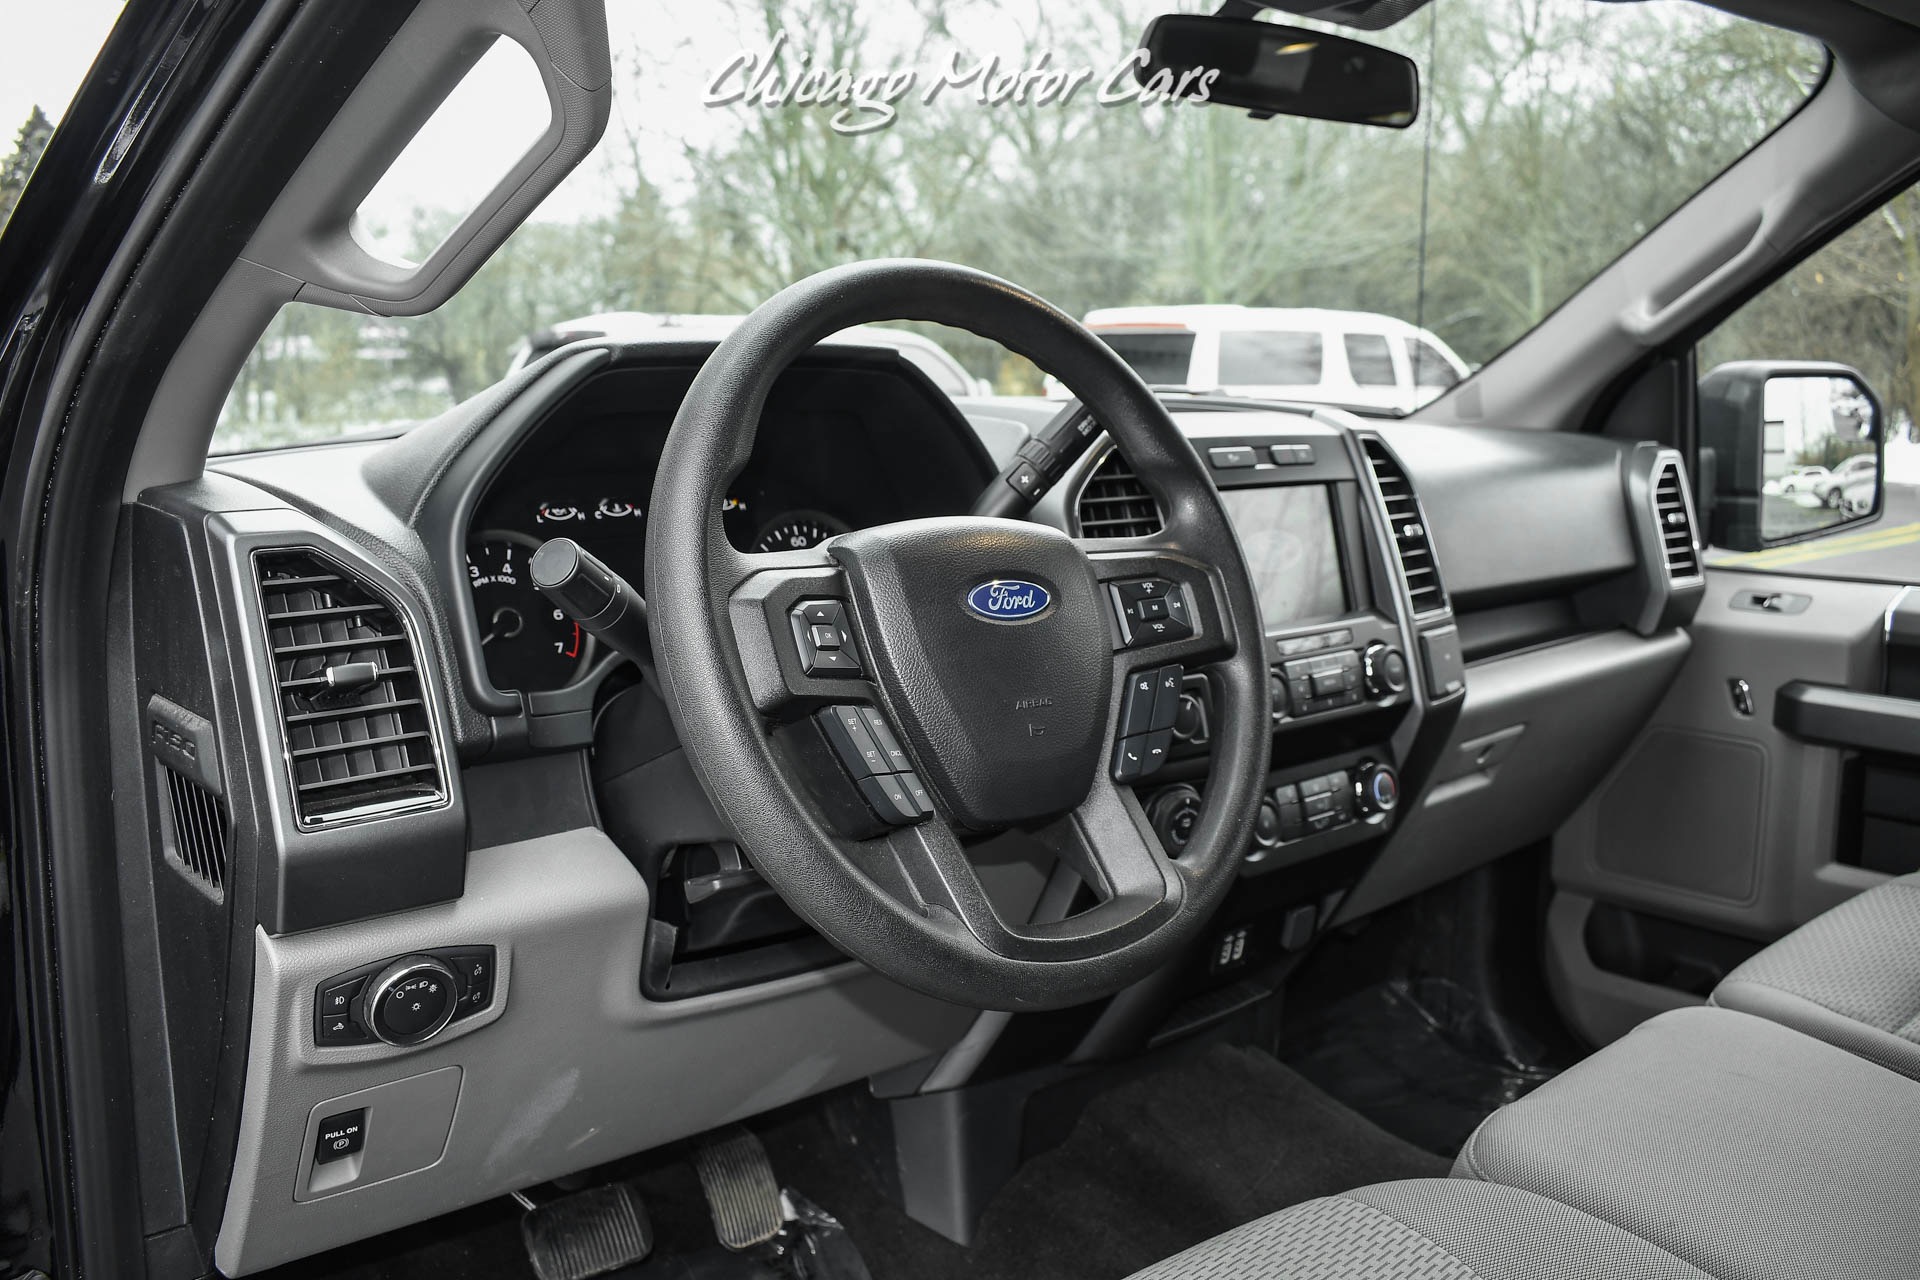 2019 Ford F150 Price, Value, Ratings & Reviews | Kelley Blue Book